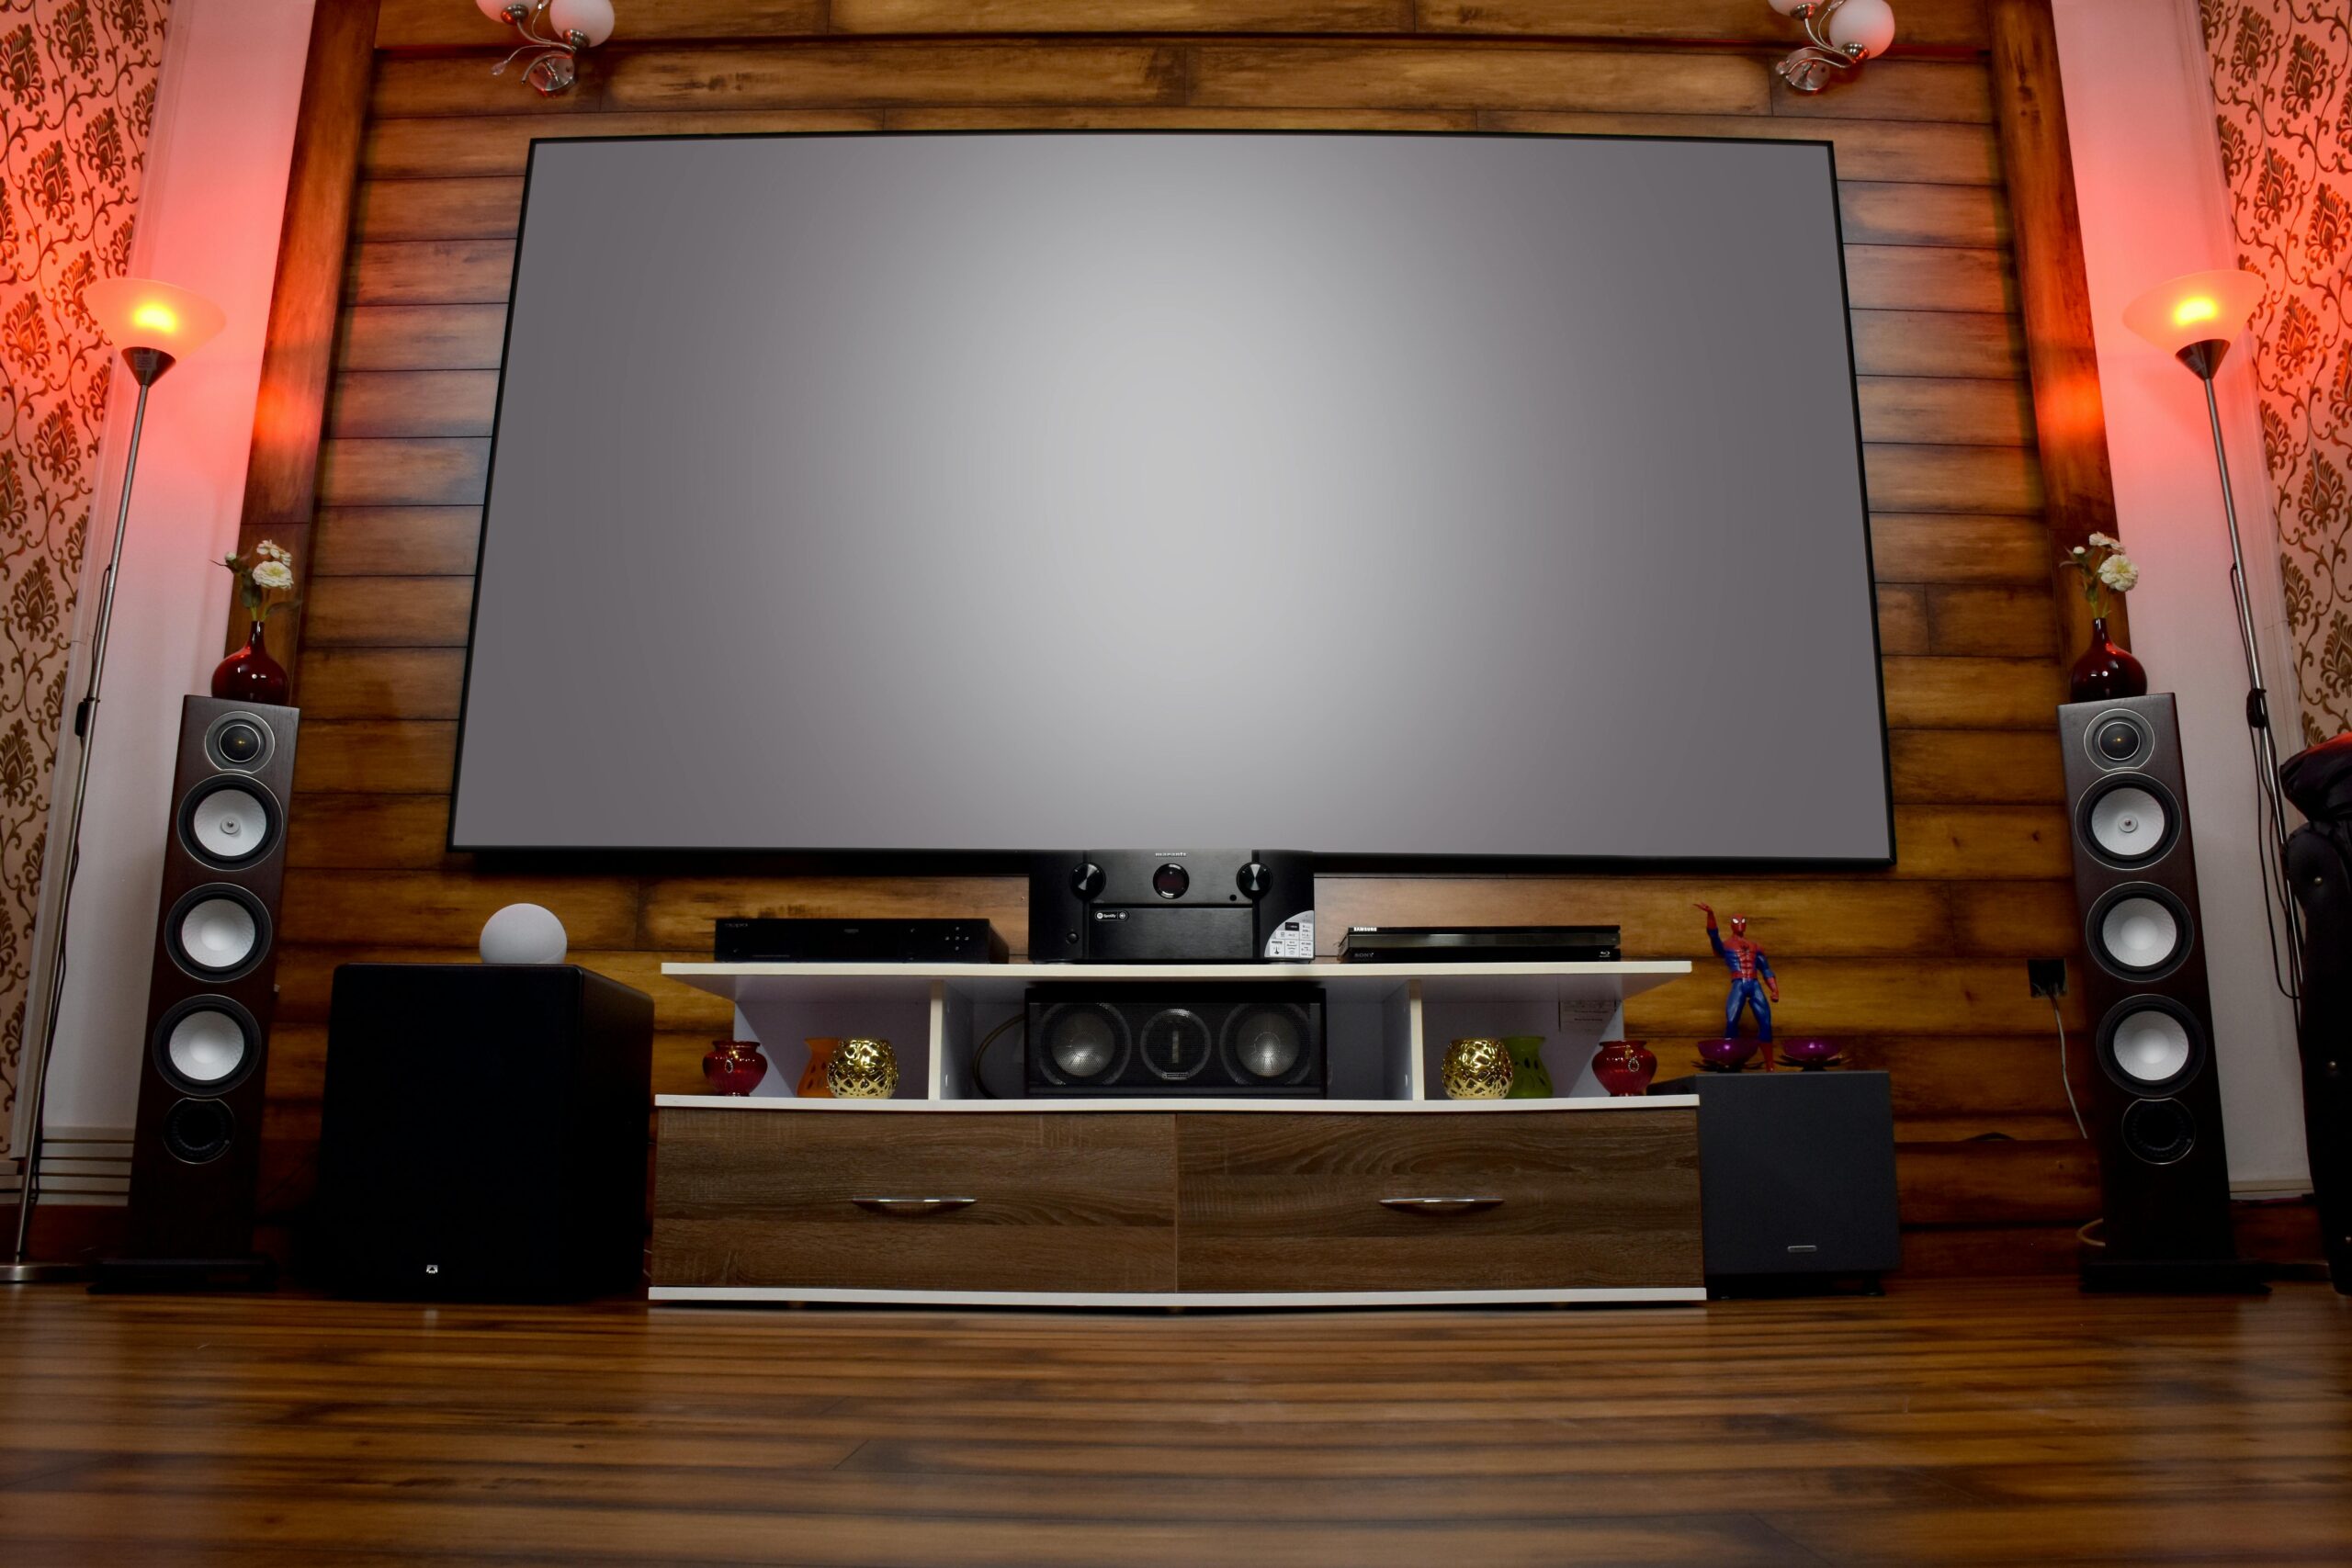 https://www.pexels.com/photo/home-theatre-projection-screen-and-equipment-13348768/